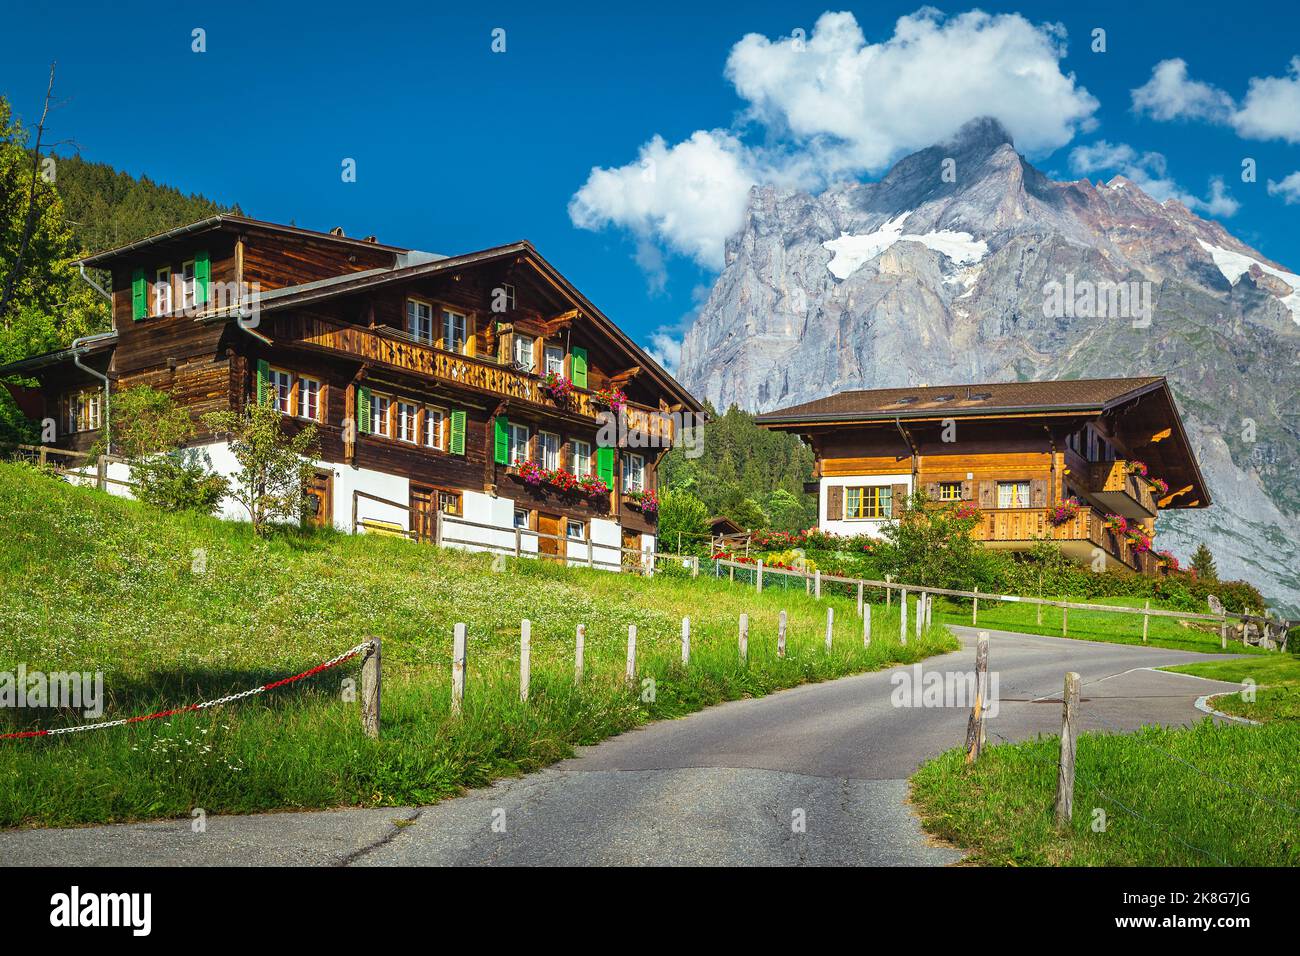 Wooden houses and flowery garden on the hill. Stunning view with high mountains, Grindelwald, Bernese Oberland, Switzerland, Europe Stock Photo